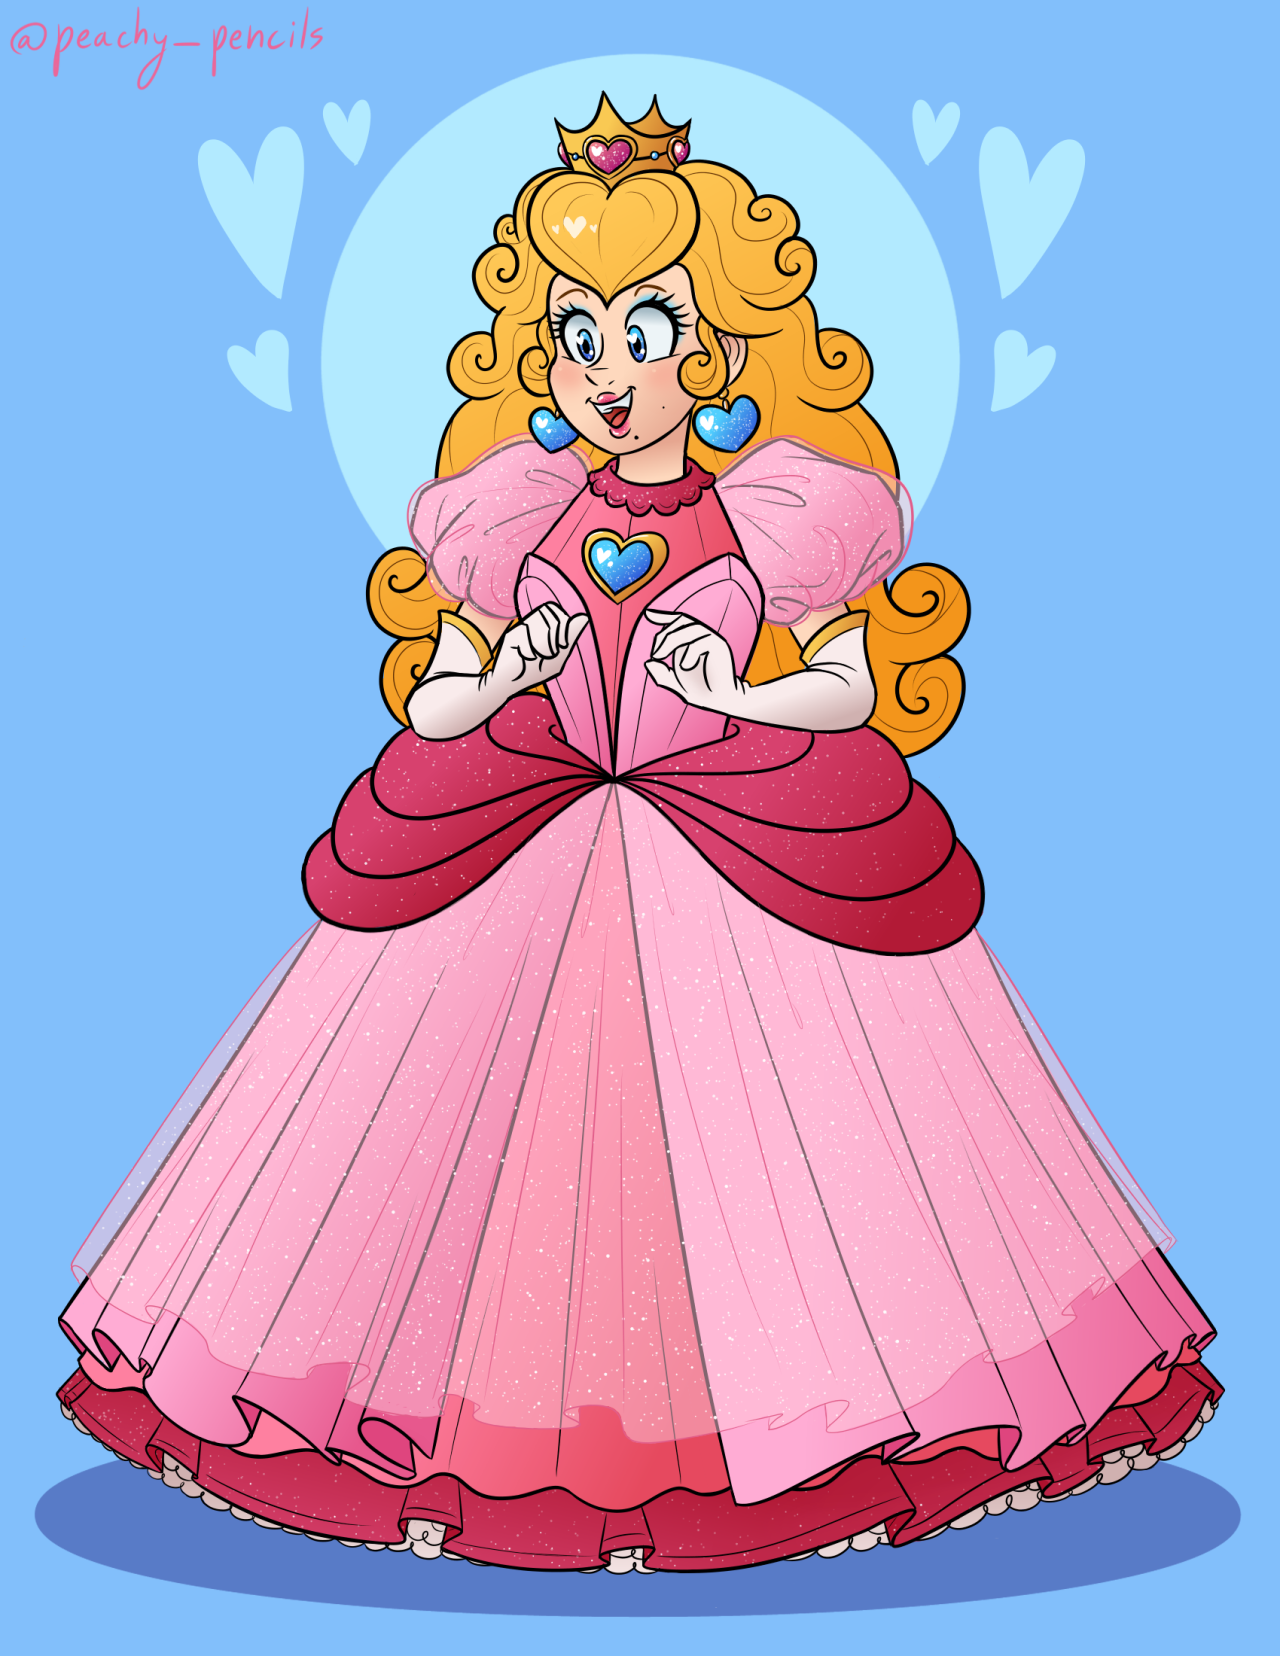 Sparkly Peach! Inspired by her Super Nintendo World dress.